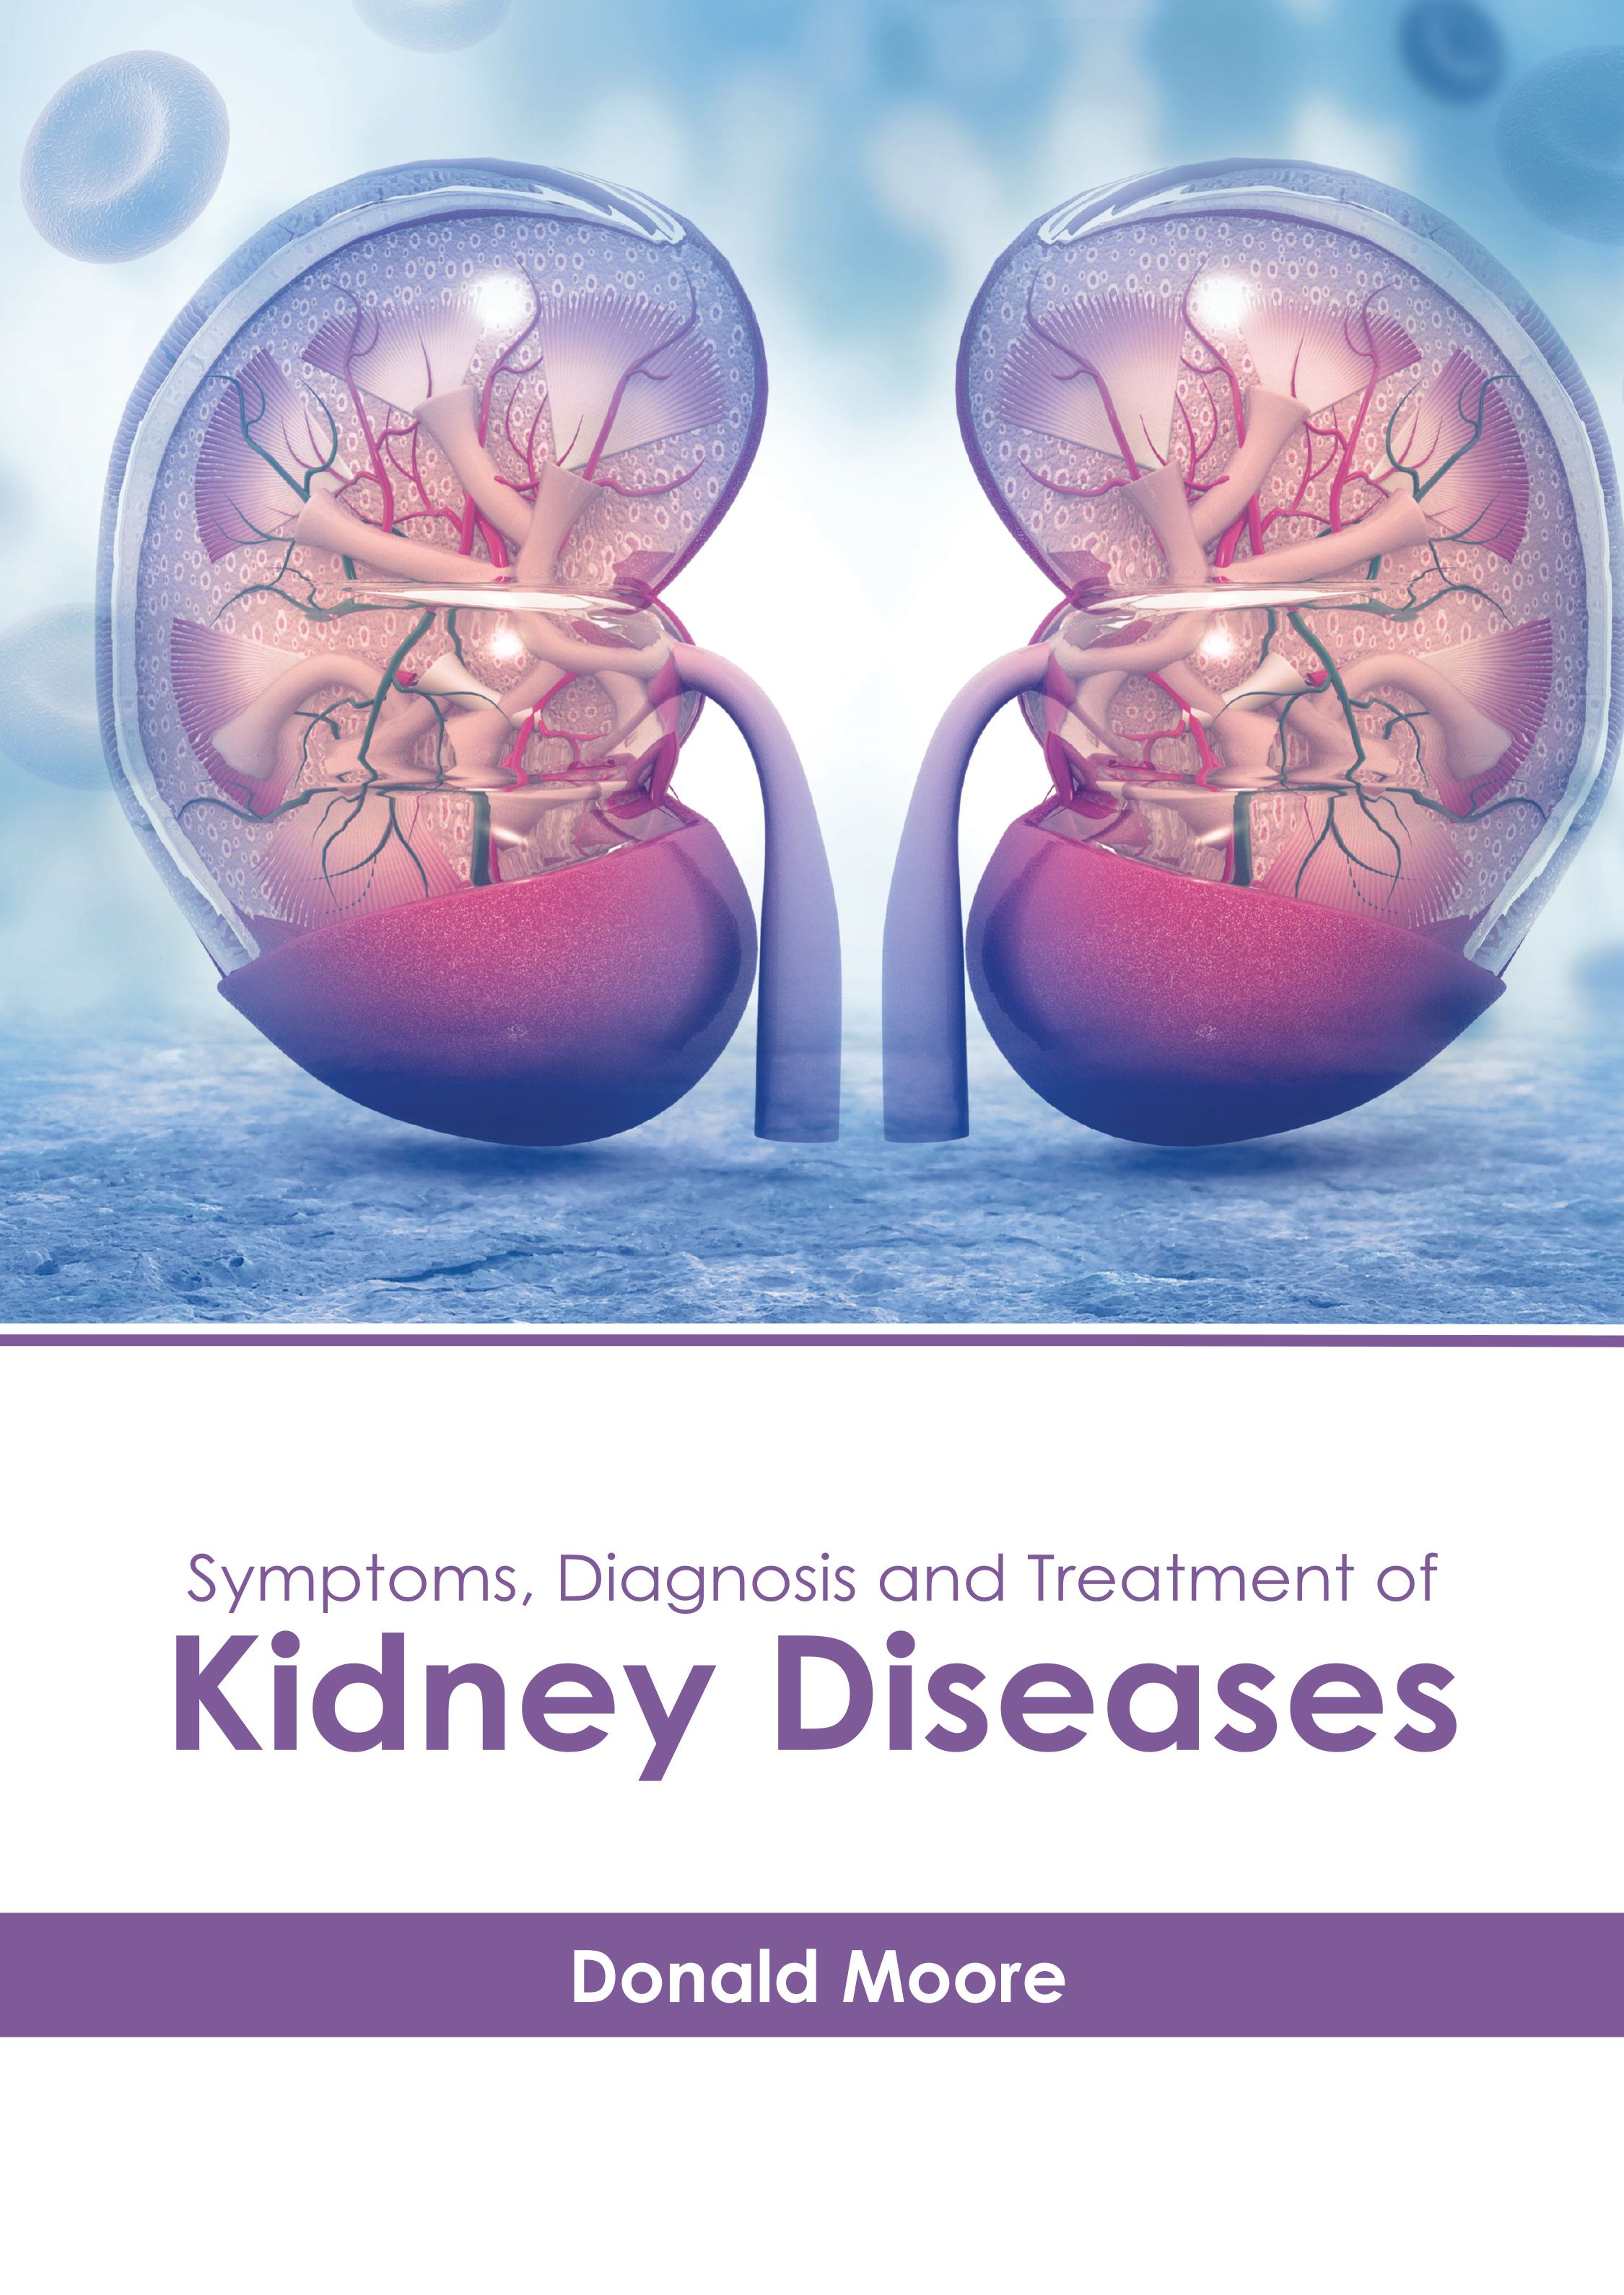 SYMPTOMS, DIAGNOSIS AND TREATMENT OF KIDNEY DISEASES